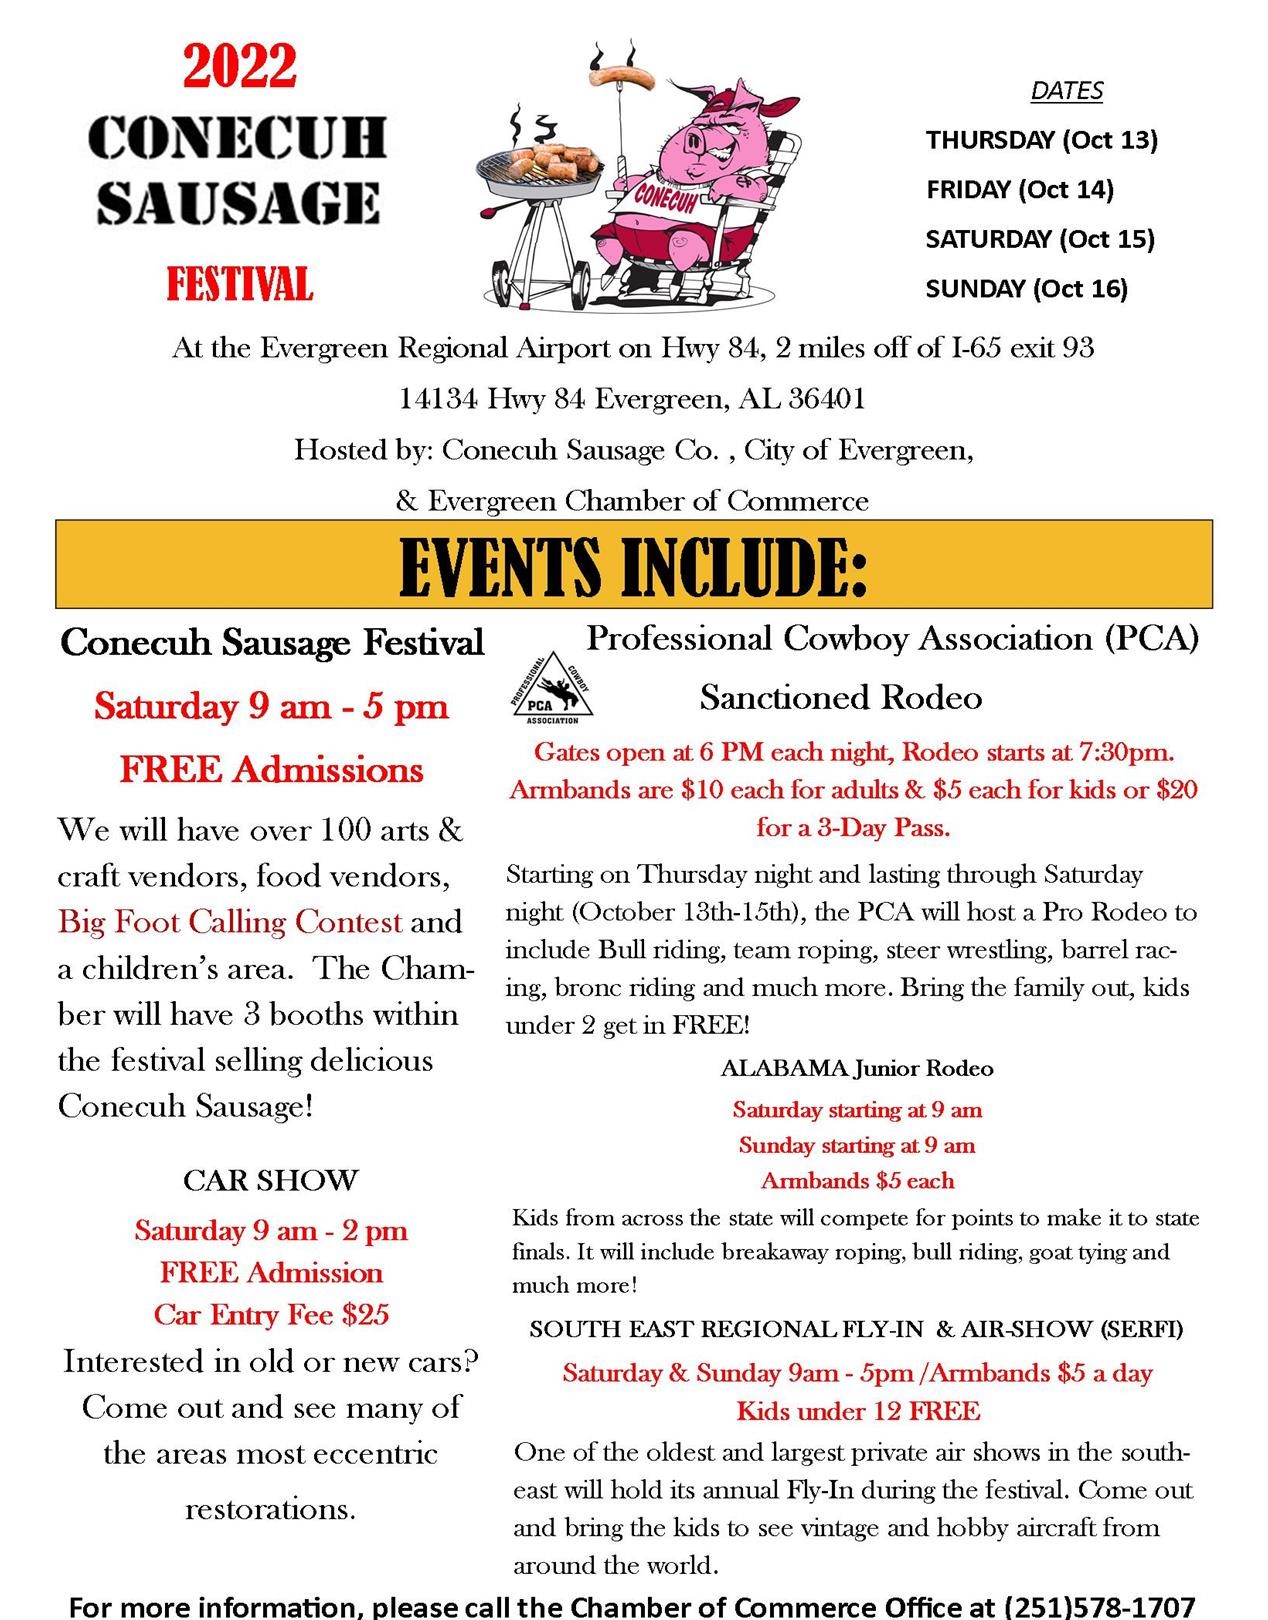 Conecuh Sausage Festival | Evergreen-Conecuh Chamber of Commerce